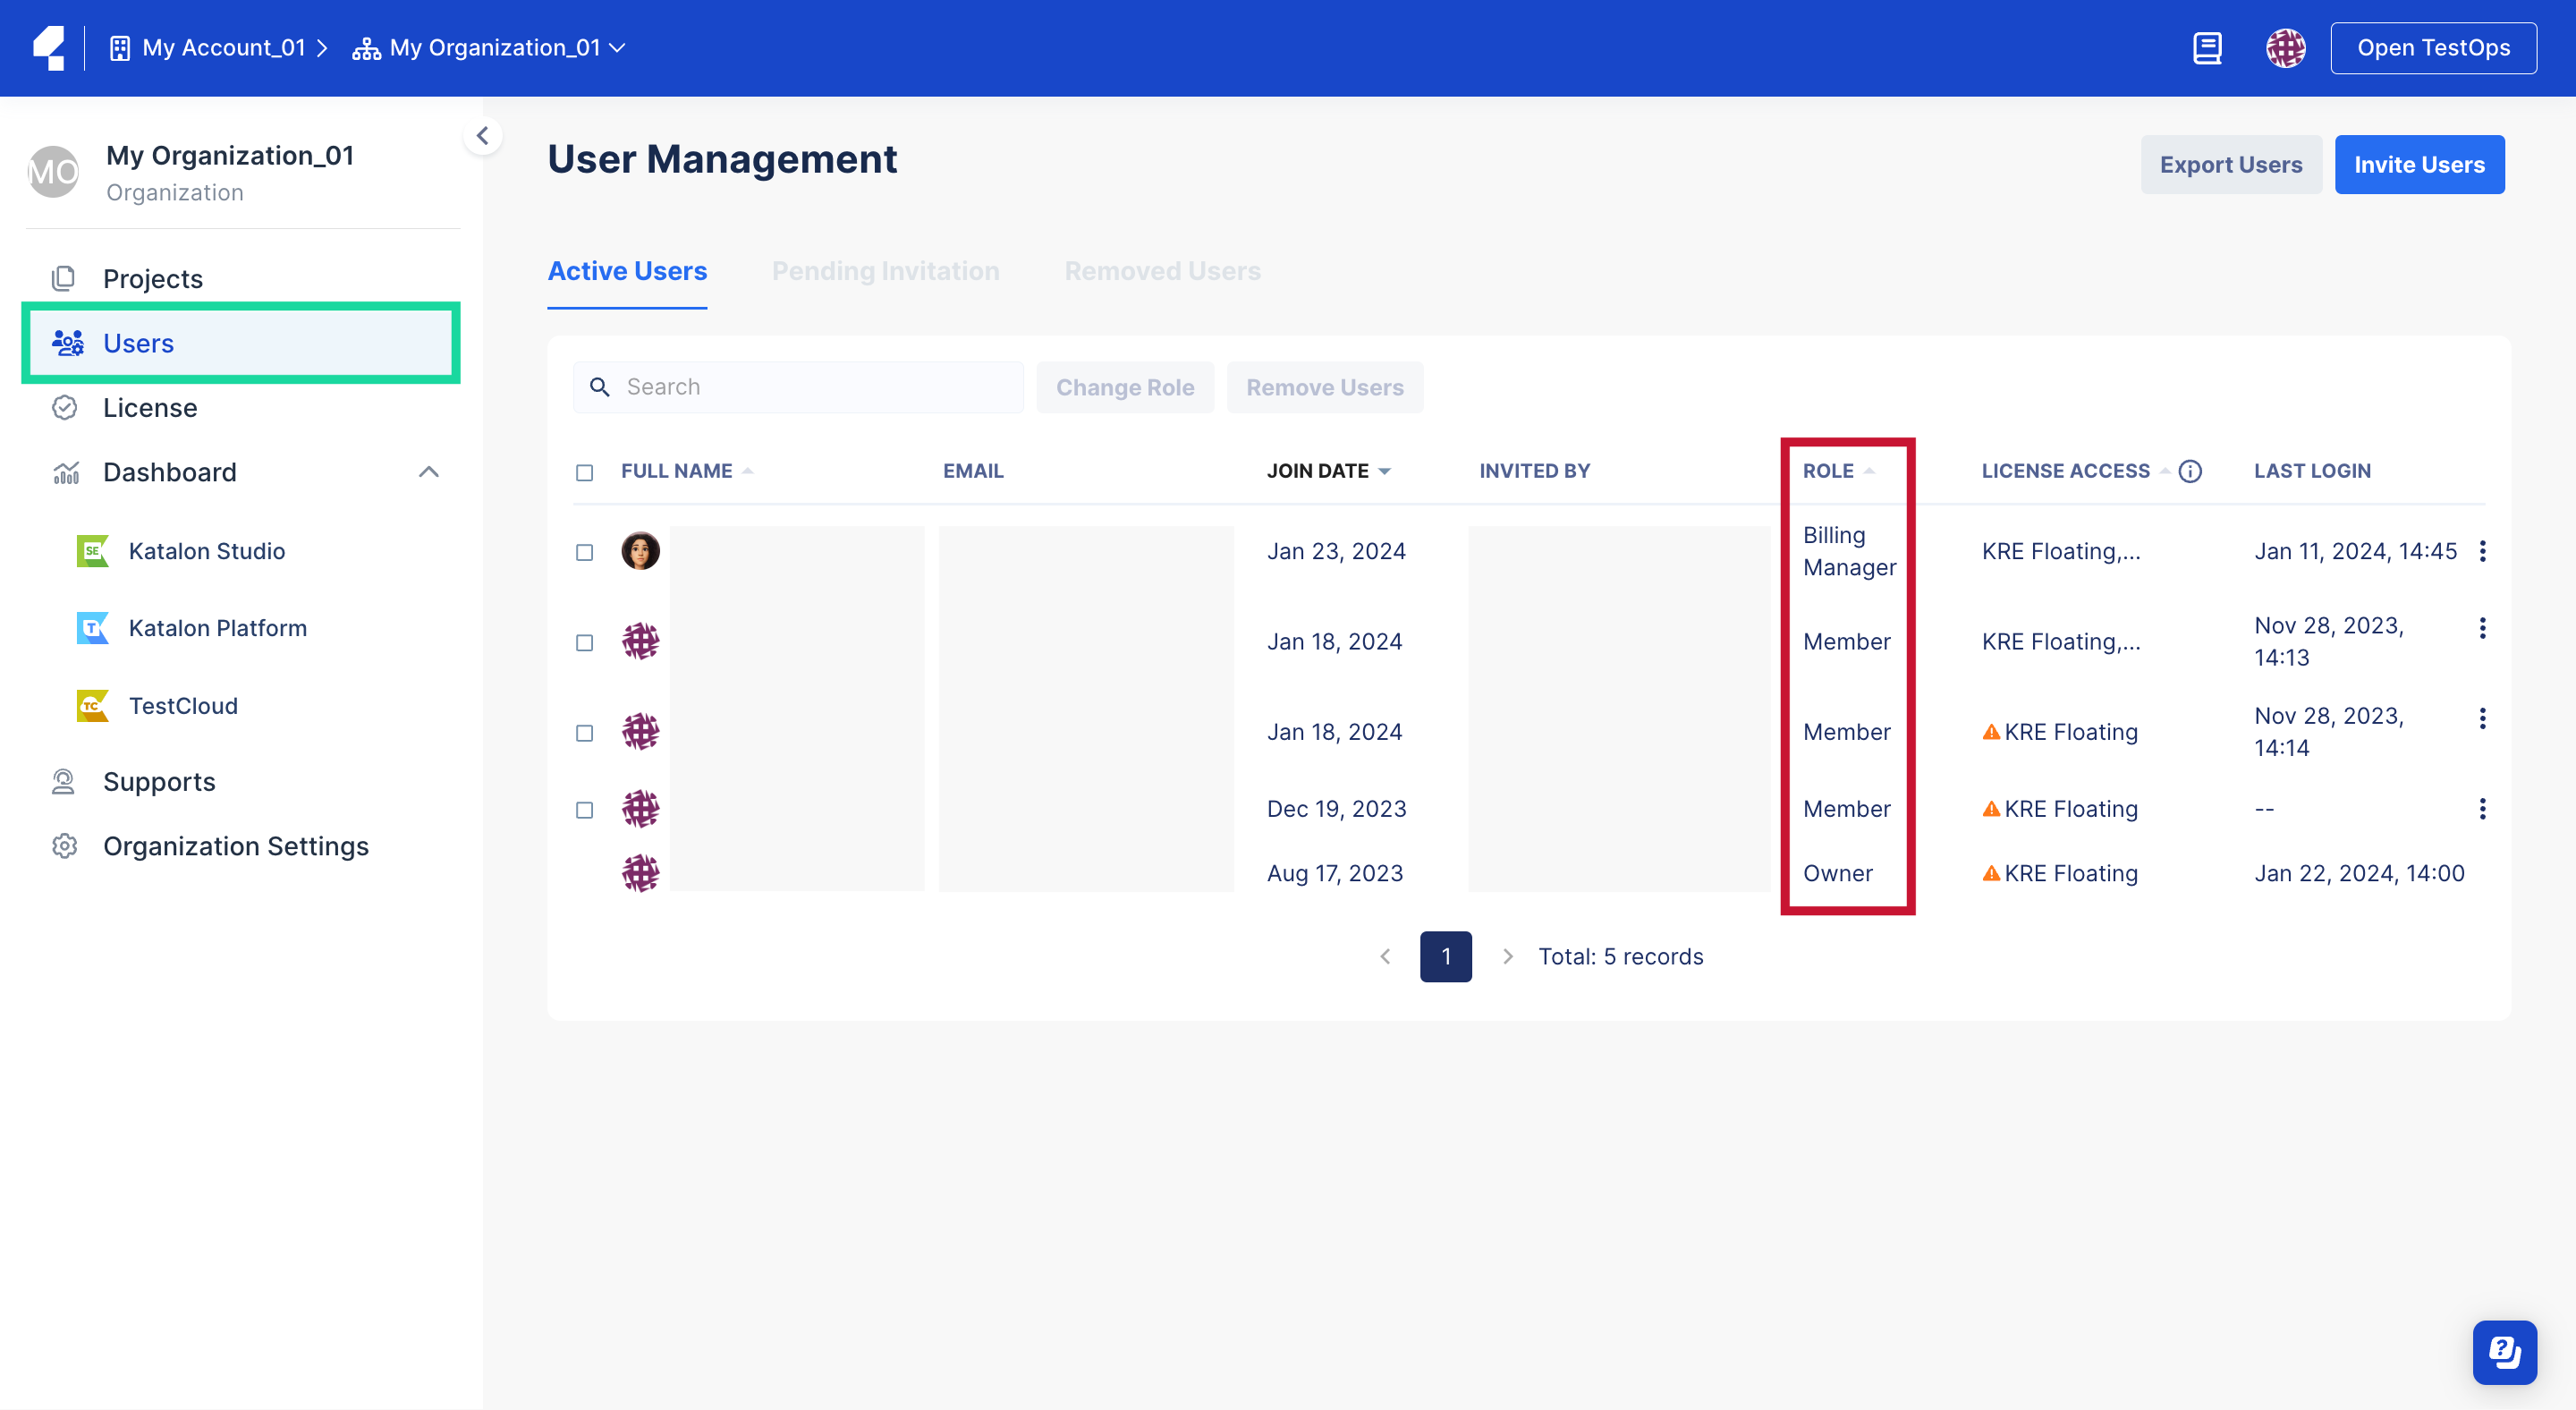 View user role in the User Management page